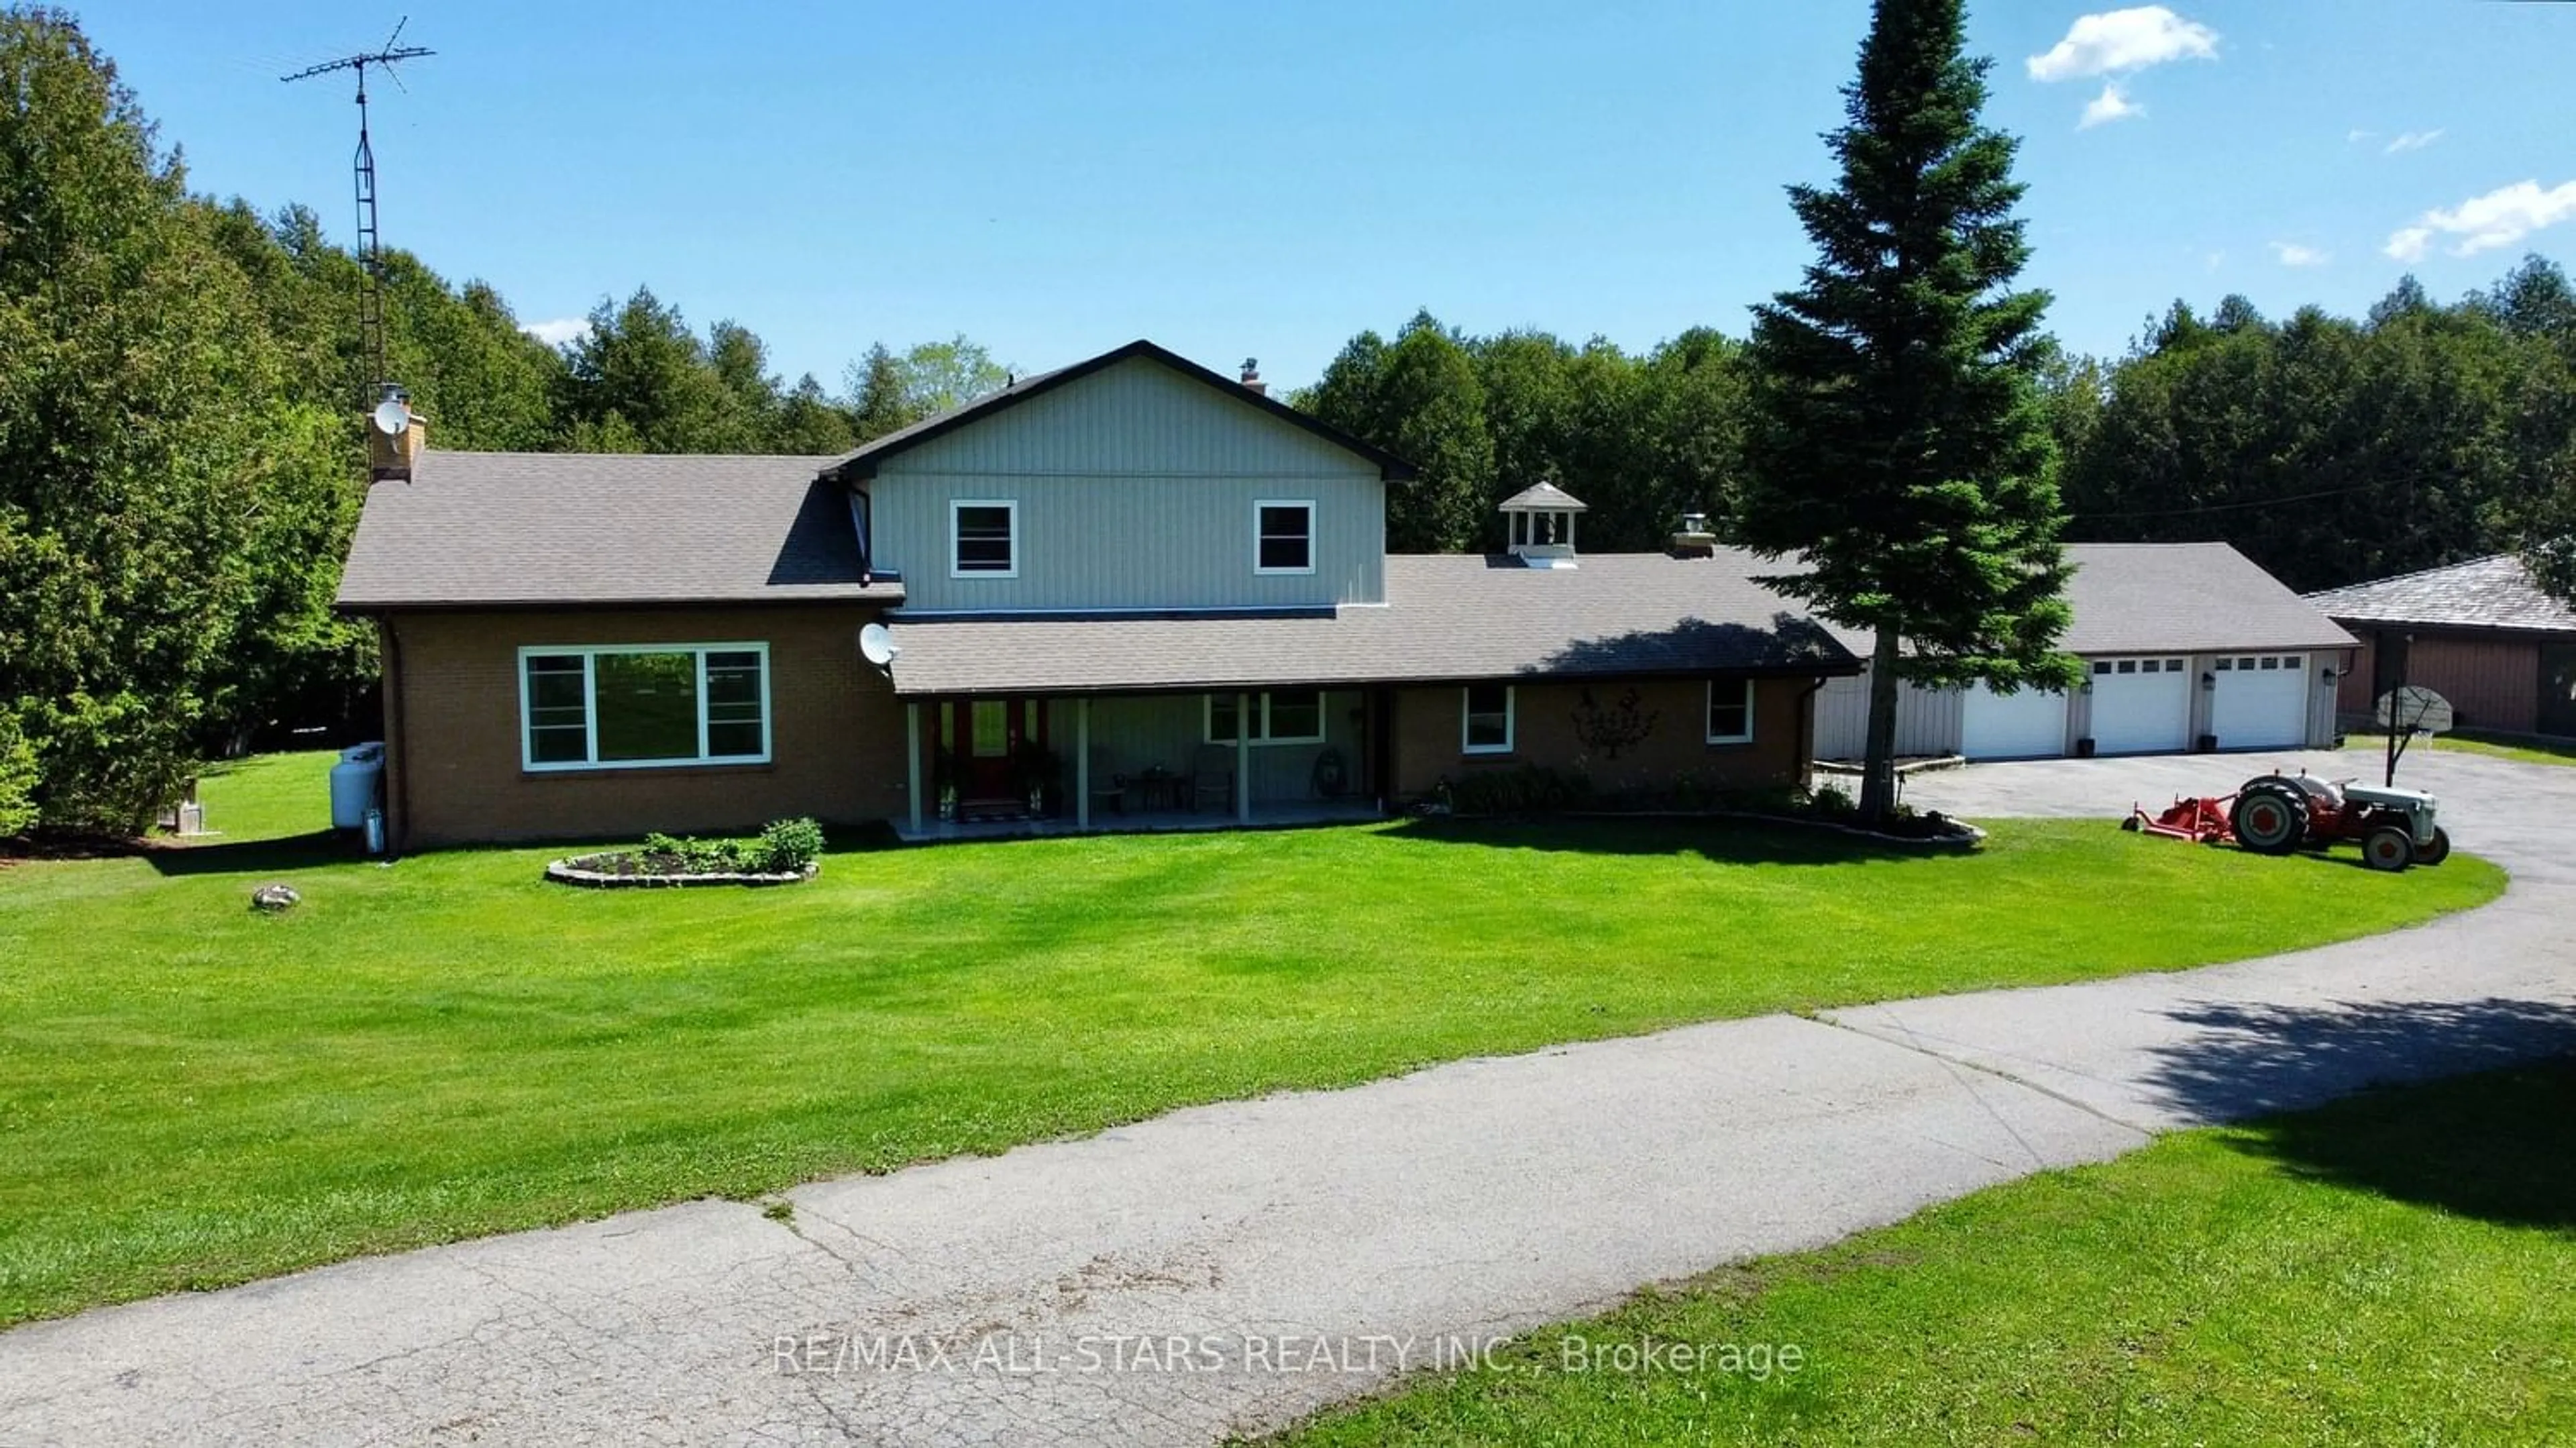 Frontside or backside of a home for 18695 Ridge Rd, Brock Ontario L0C 1H0